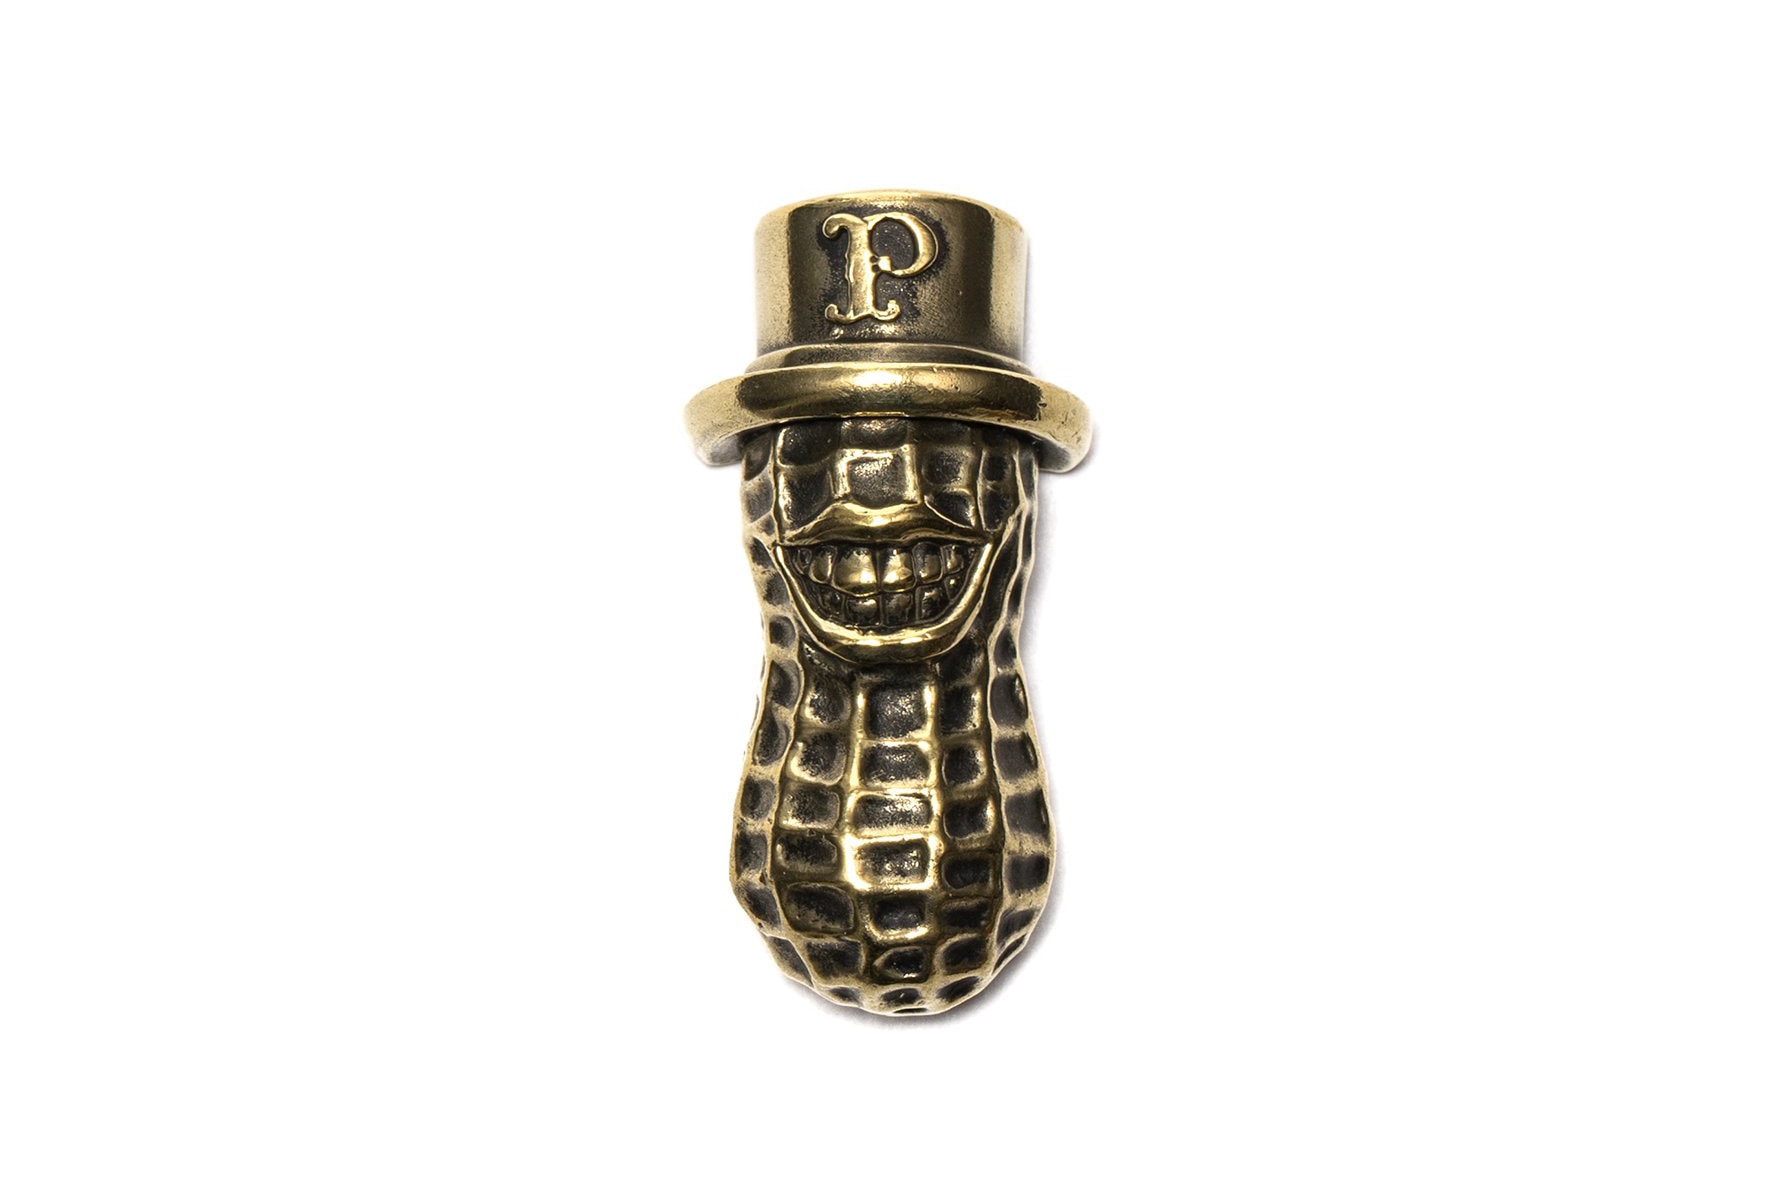 Peanuts & Co. Accessories rings necklaces pins pendants chains release info